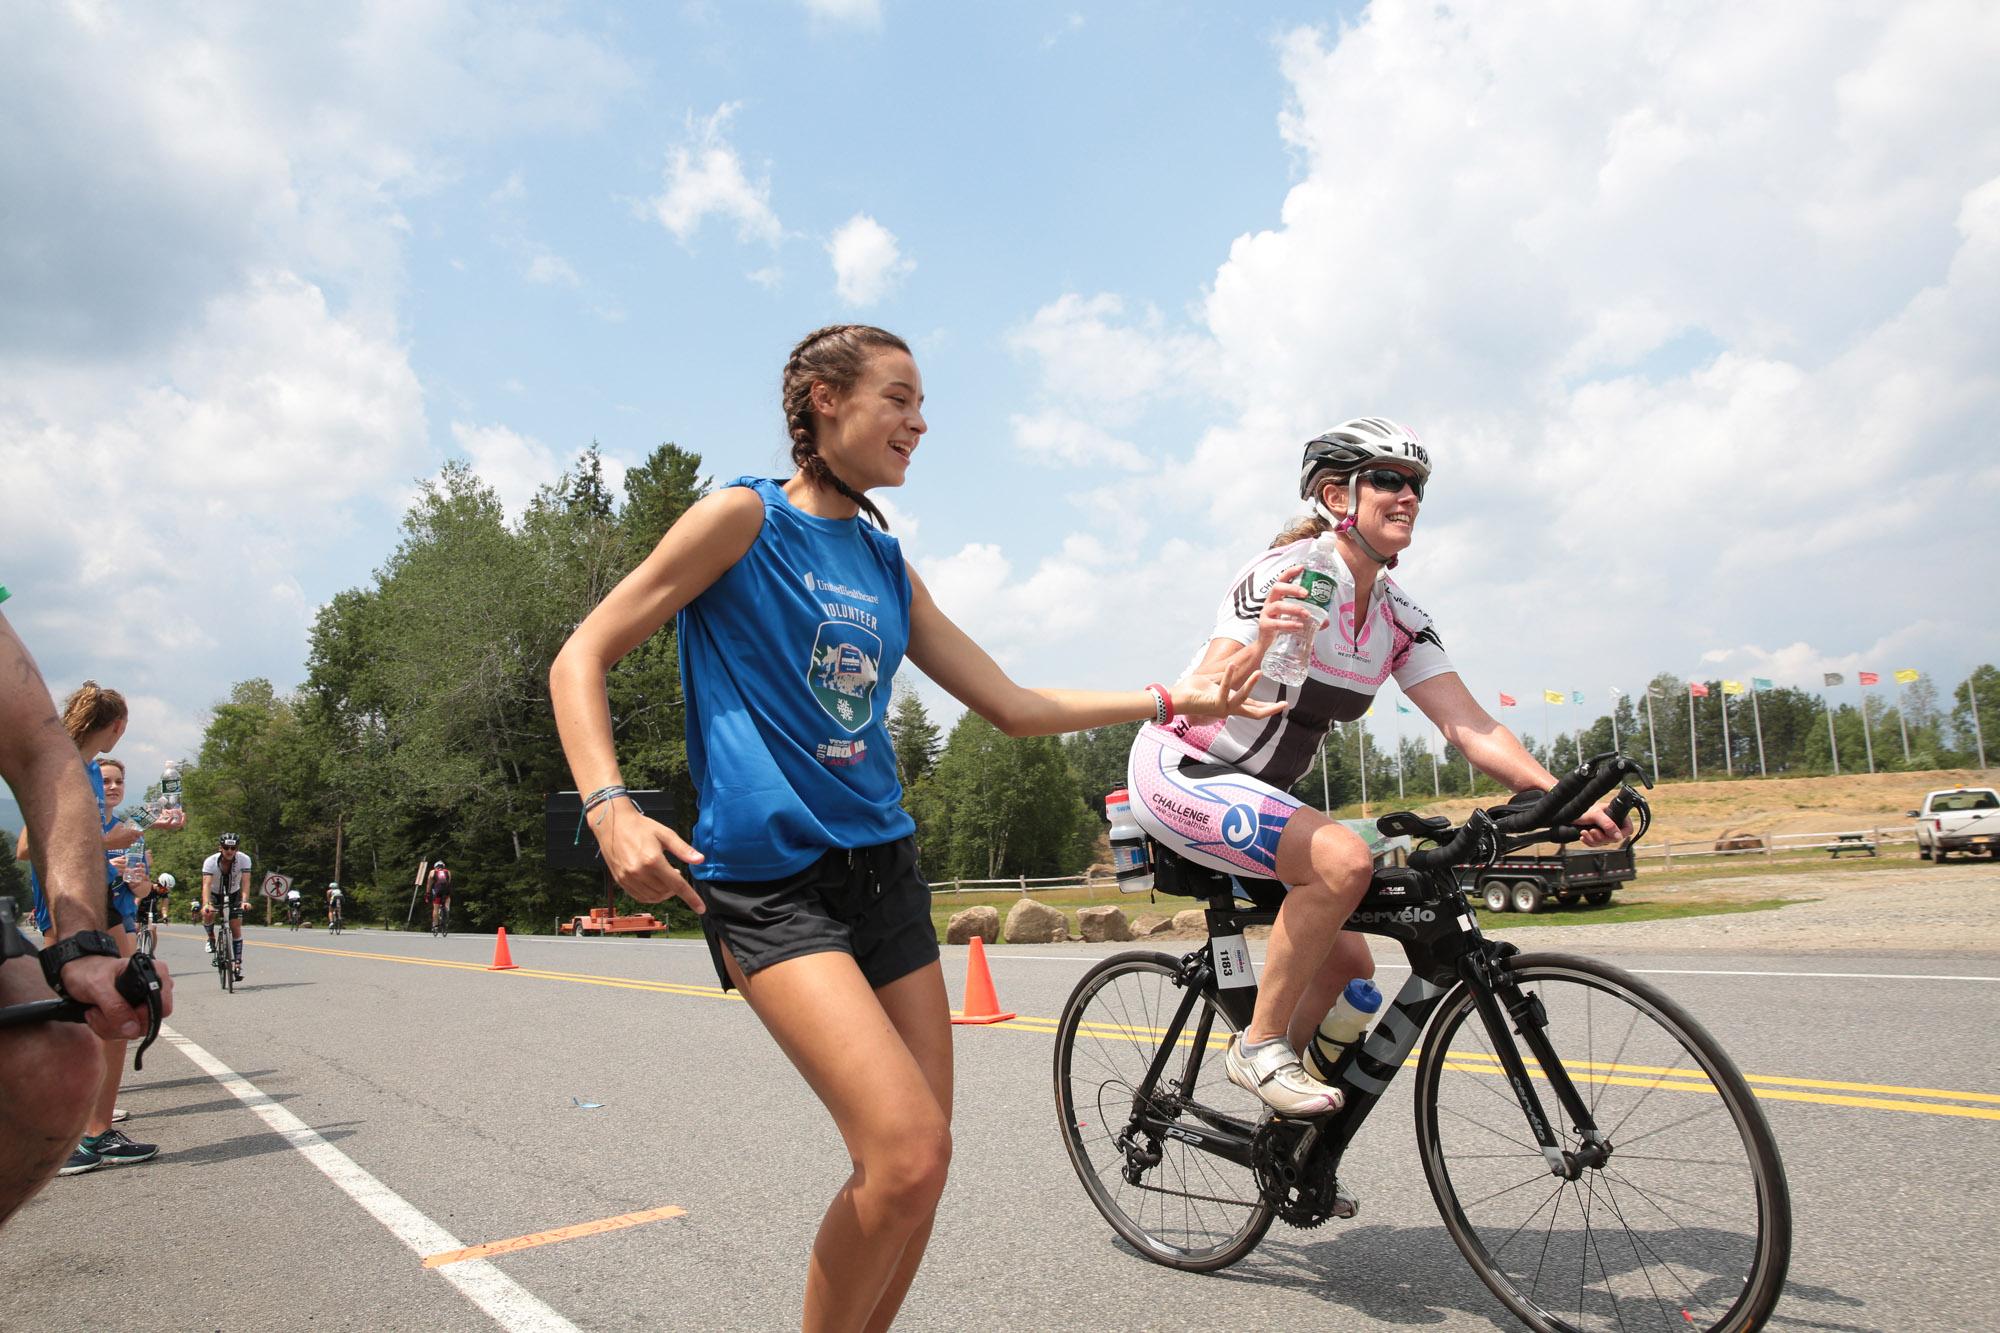 A volunteer hands off a bottle of water to a cyclist during the Ironman triathlon